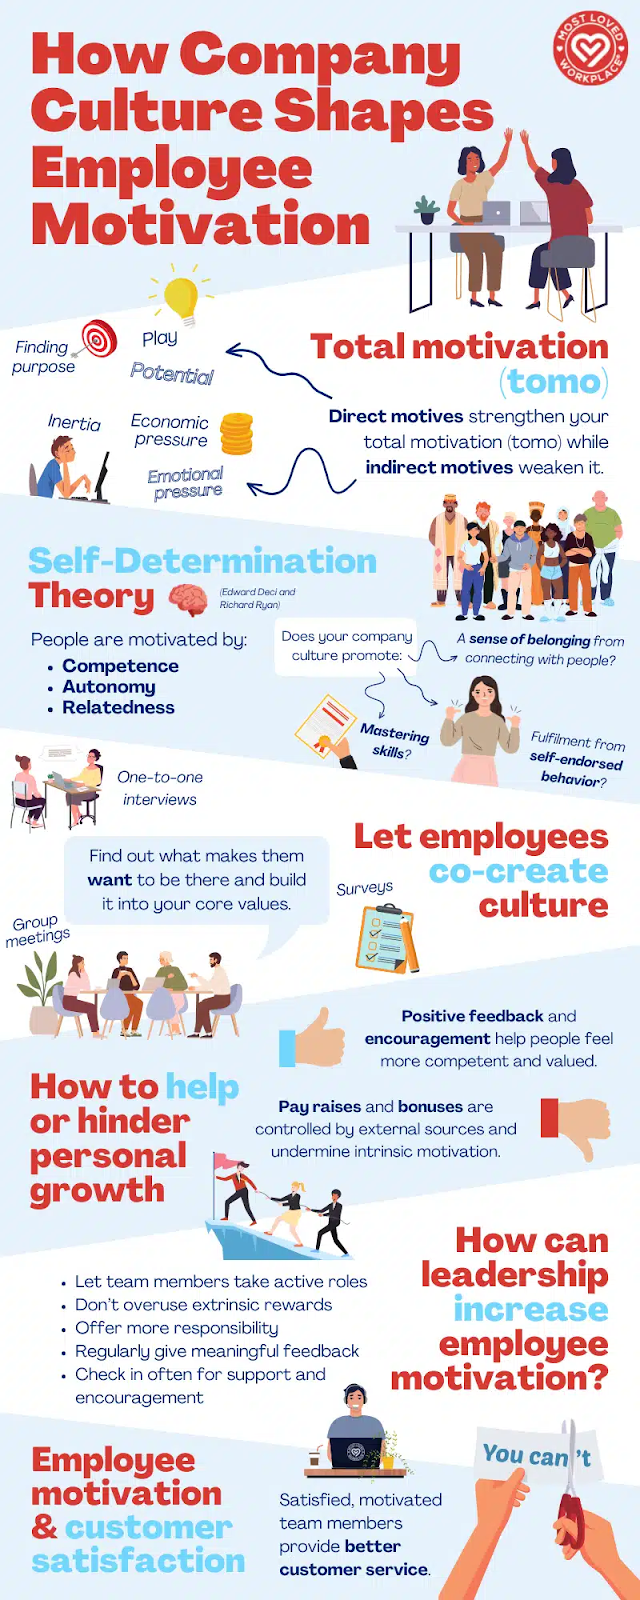 This is an infographic showing how company culture shapes employee motivation. It covers images depicting: Total motivation, Self-determination theory, letting employees co-create culture, how to help or hinder personal growth and how leadership can increase employee motivation.